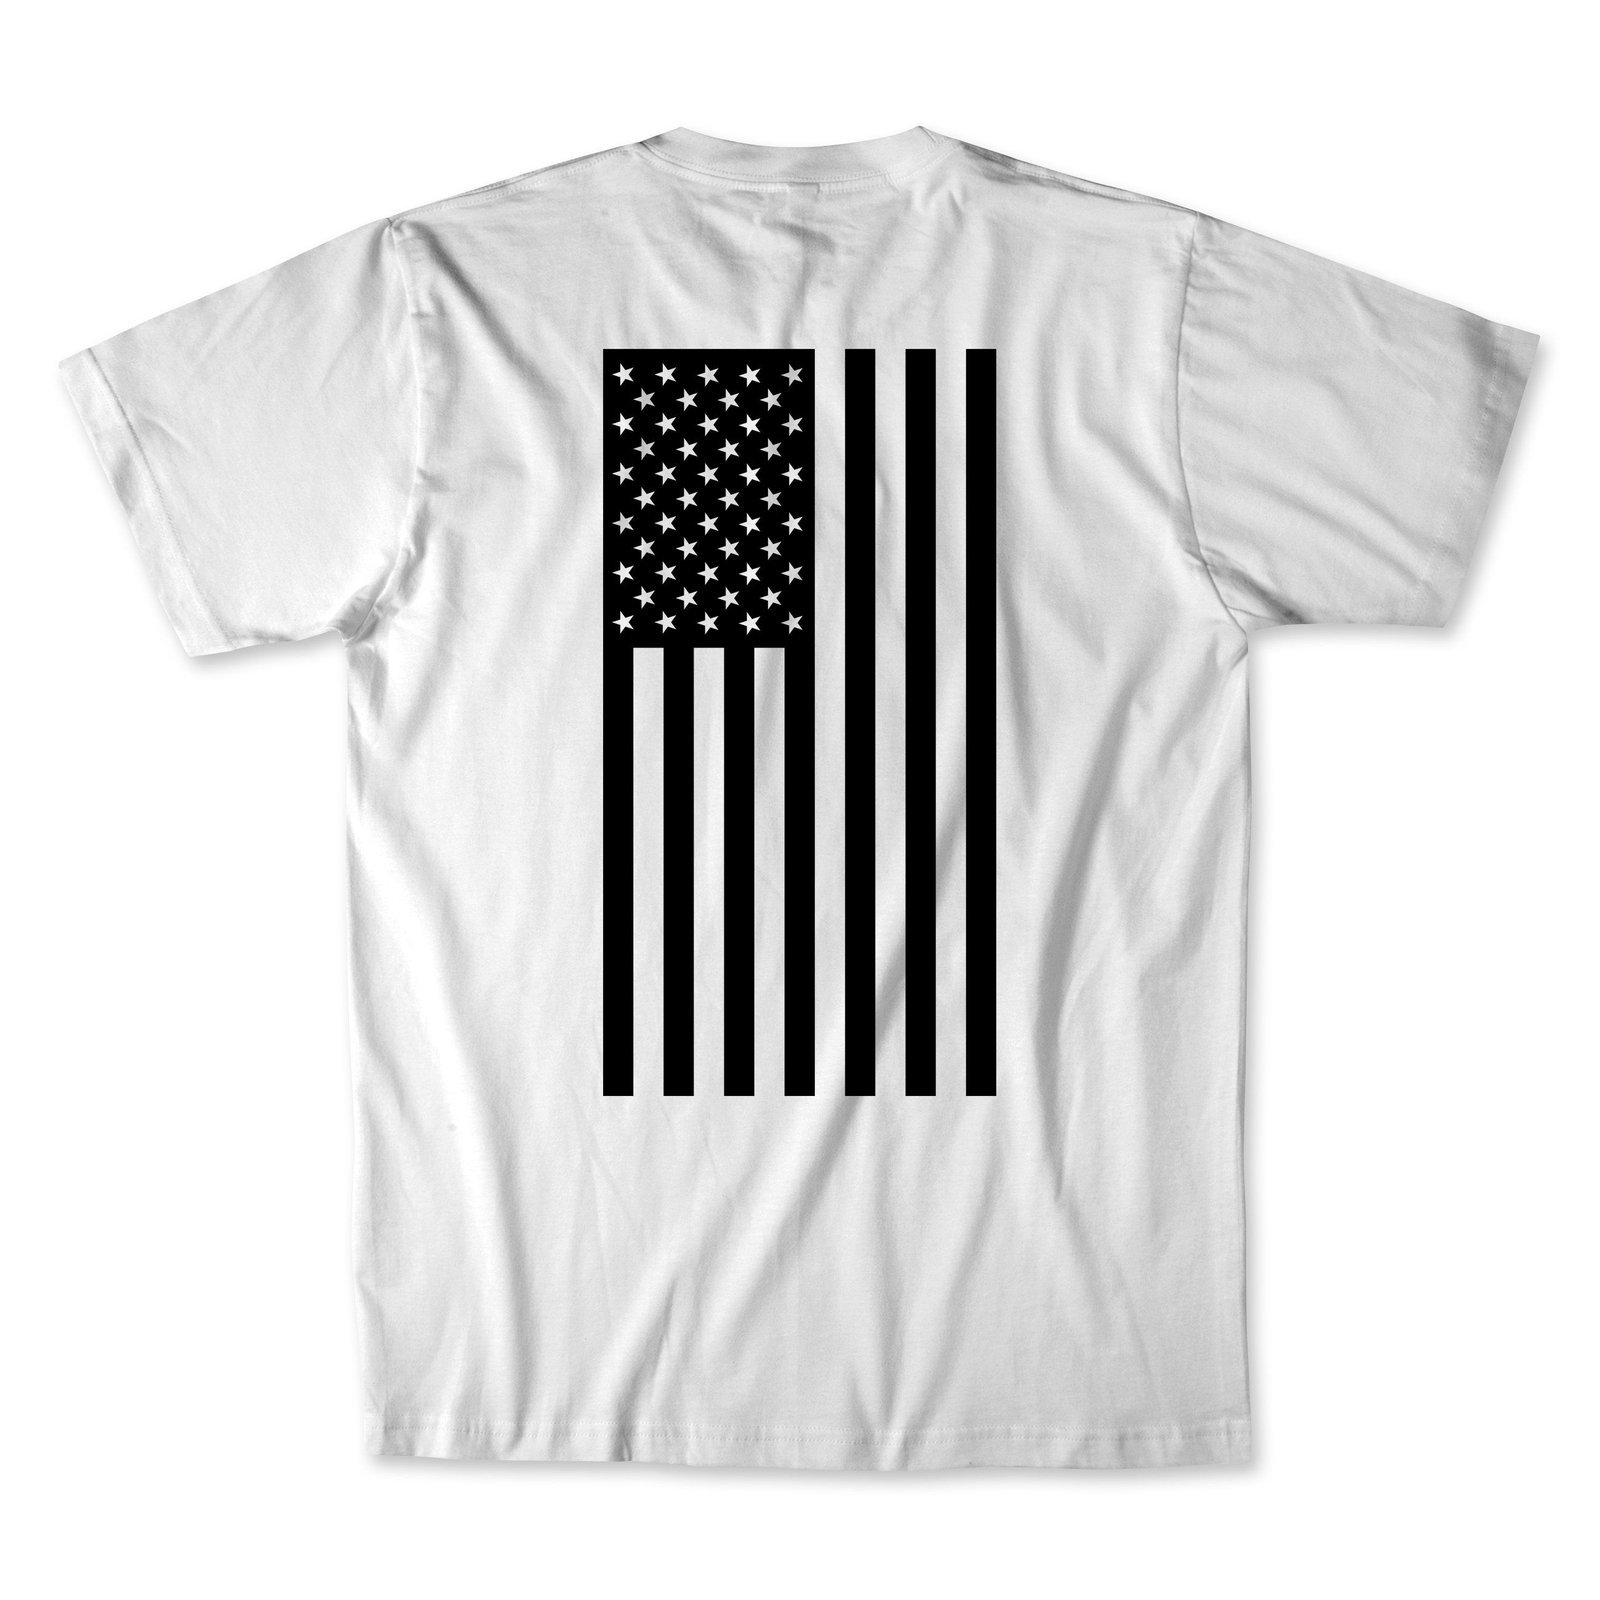 T-Shirt With Flag - Choice Of 5 Colors - T-Shirts Made For Riding - SKU FIT-004-FM